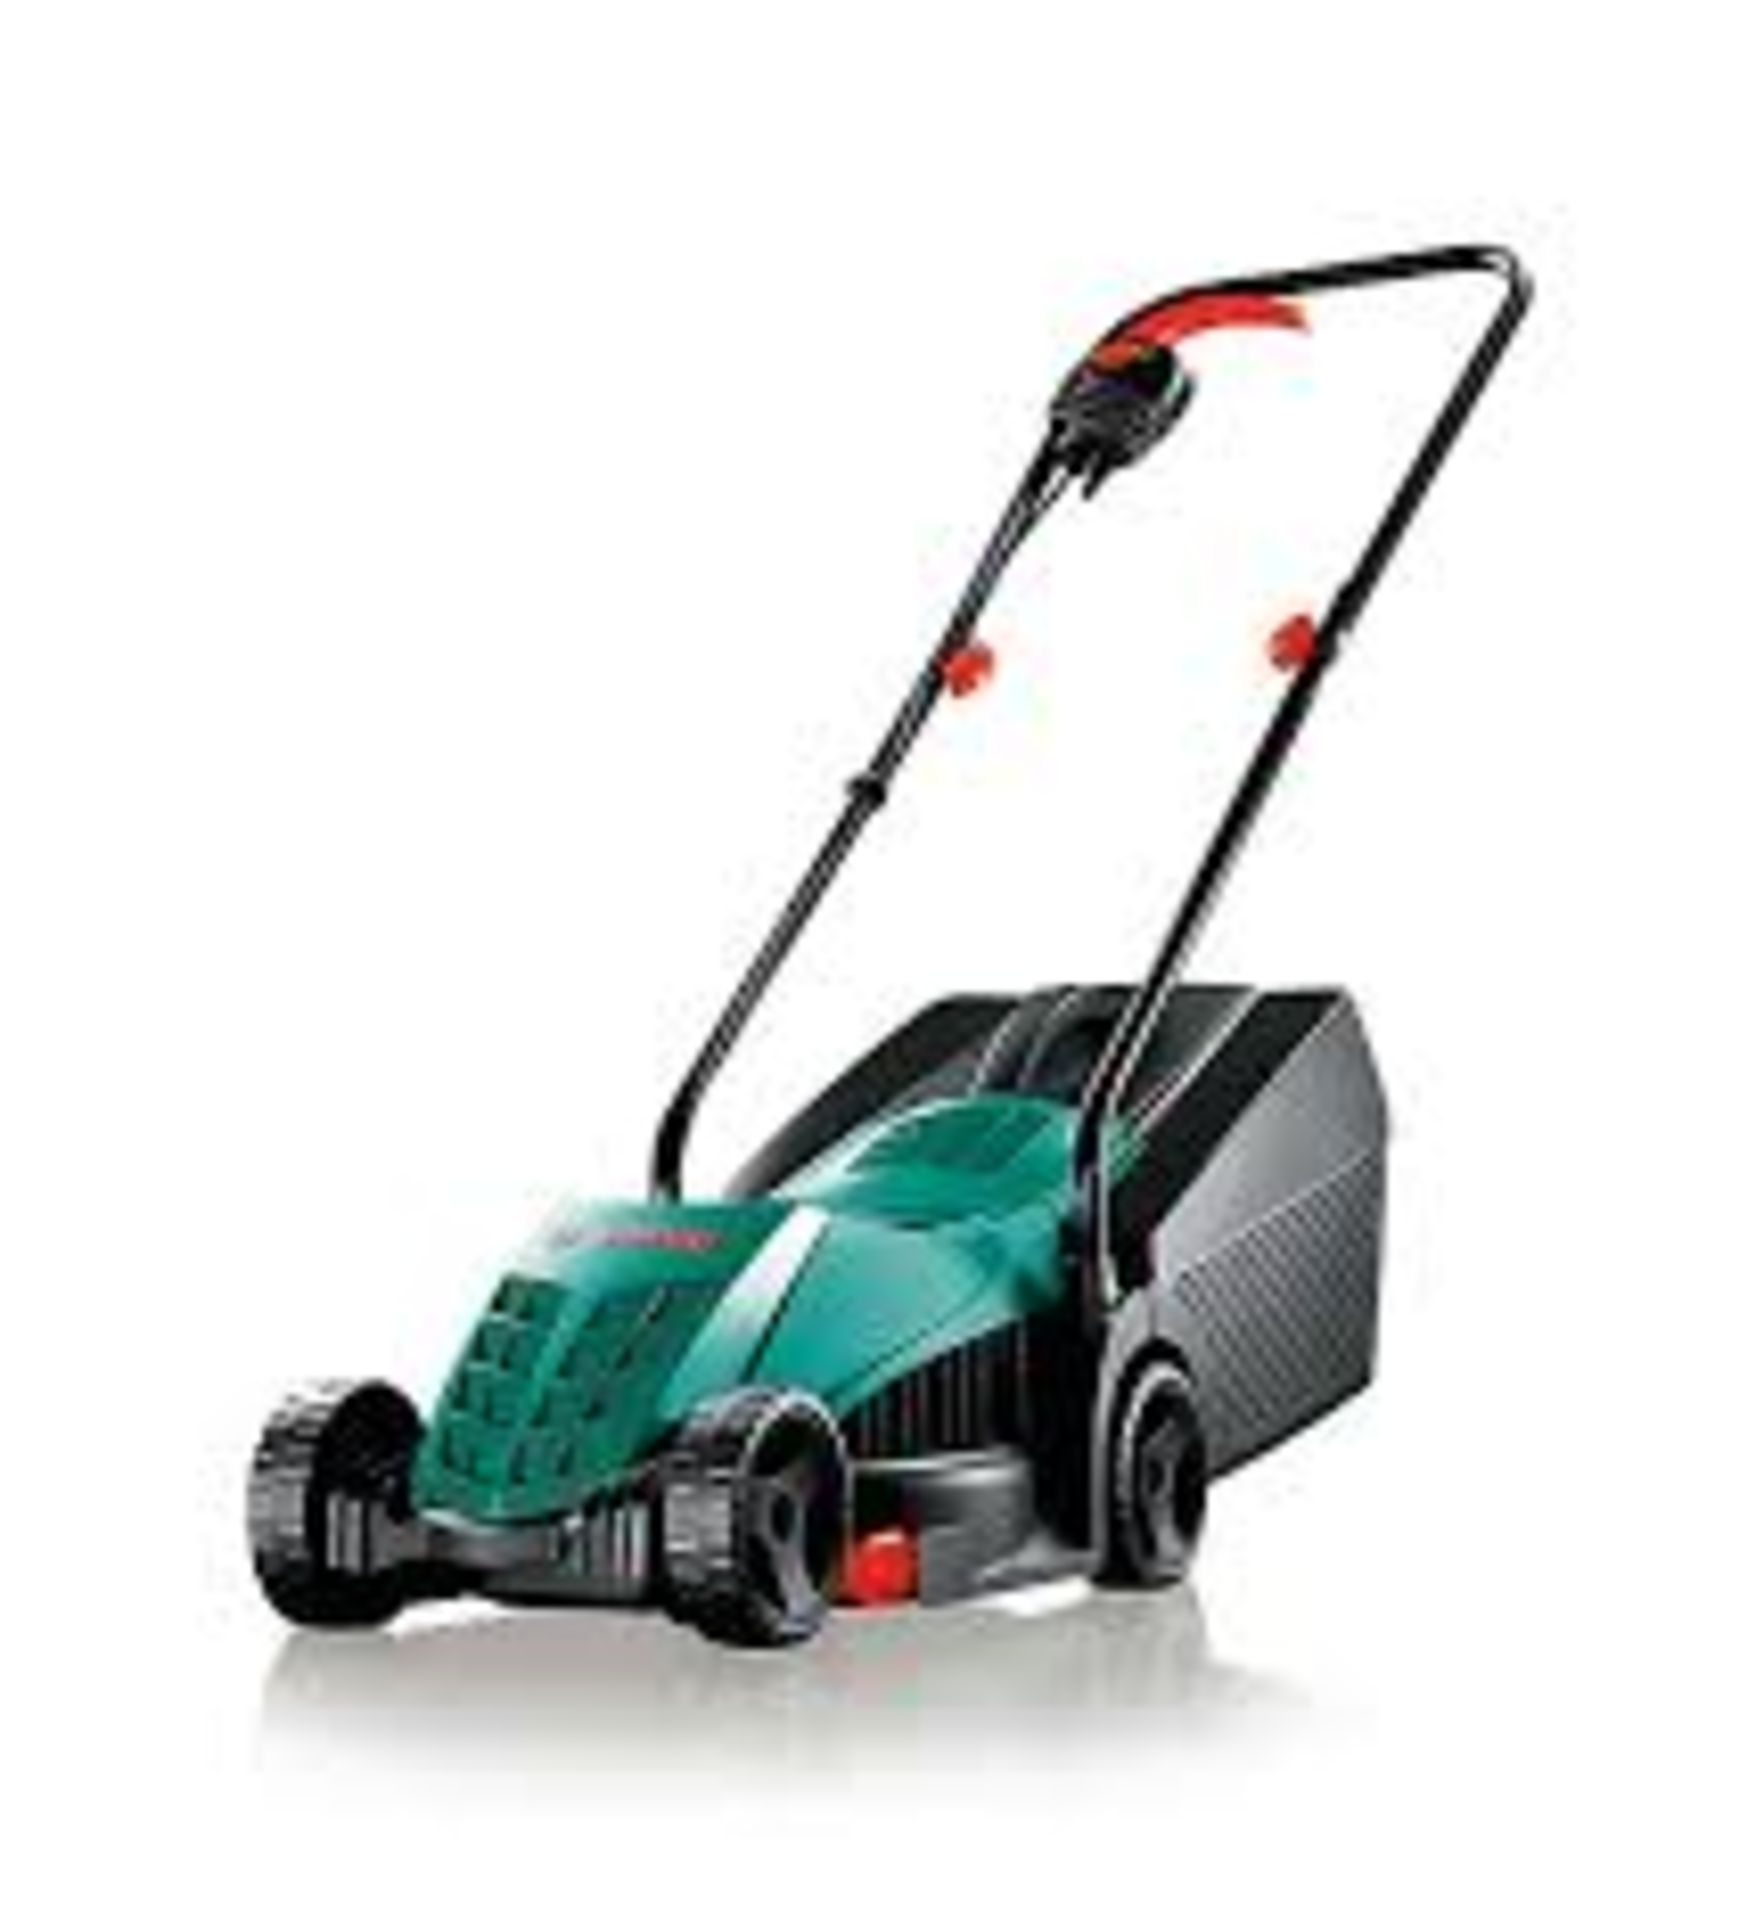 Bosch Rotak 320ER Corded Rotary Lawnmower. - S2. Lightweight and compact lawn mower that cuts